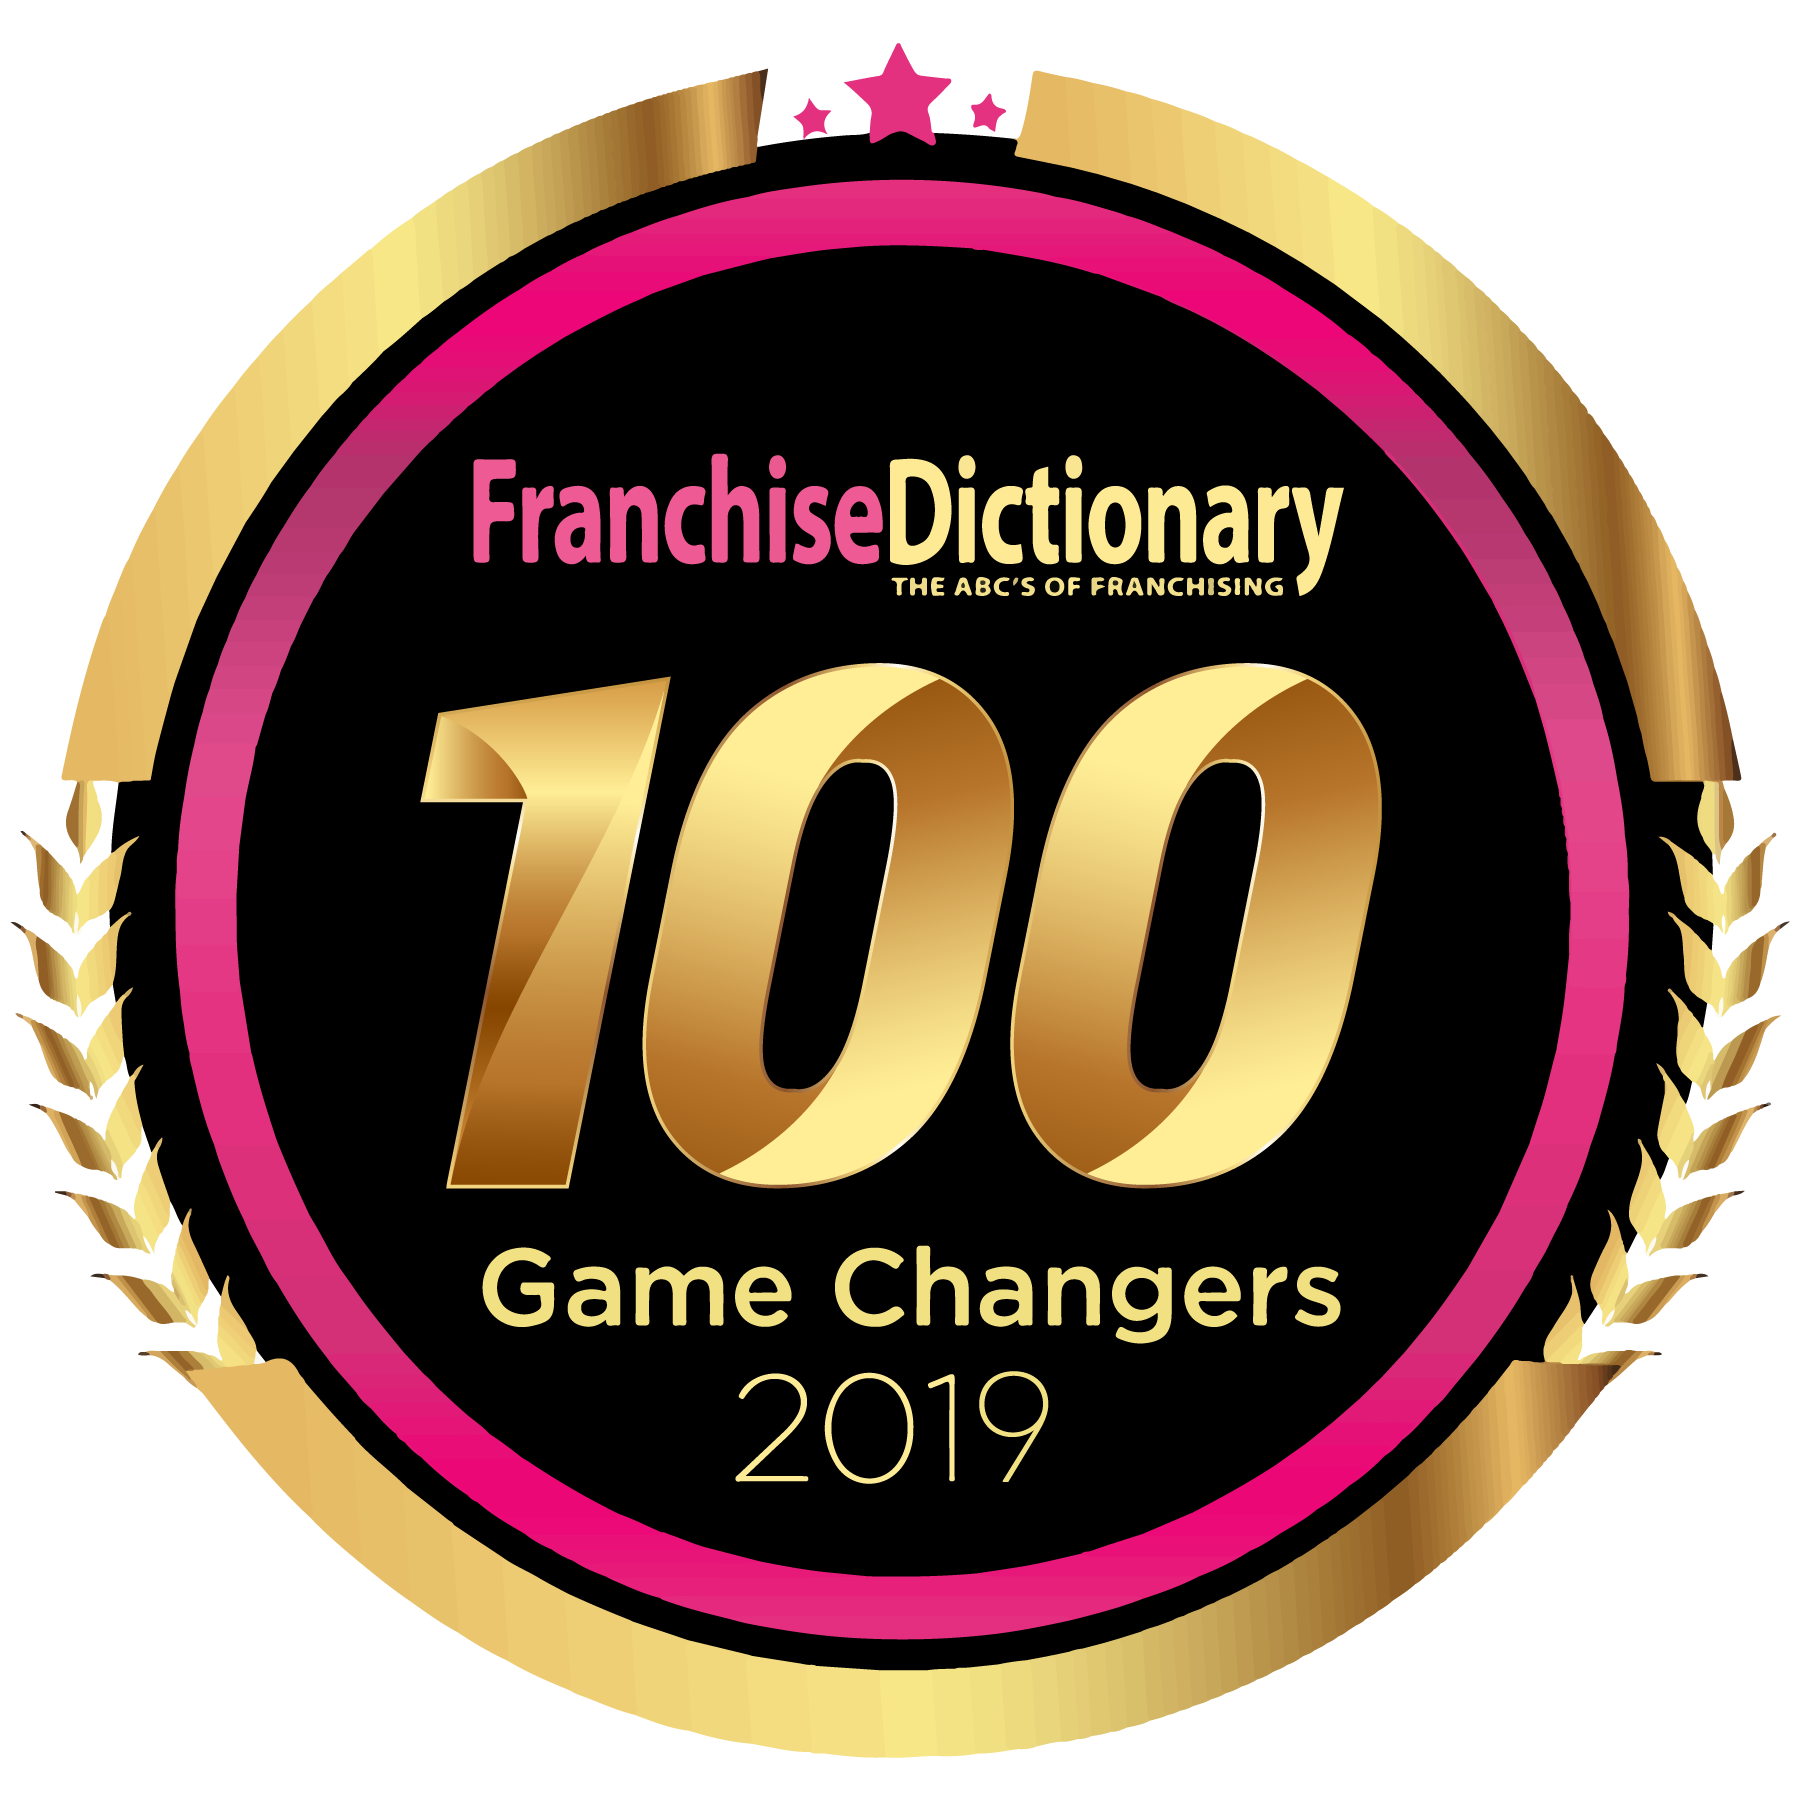 Franchise dictionary 100 game changers 2019